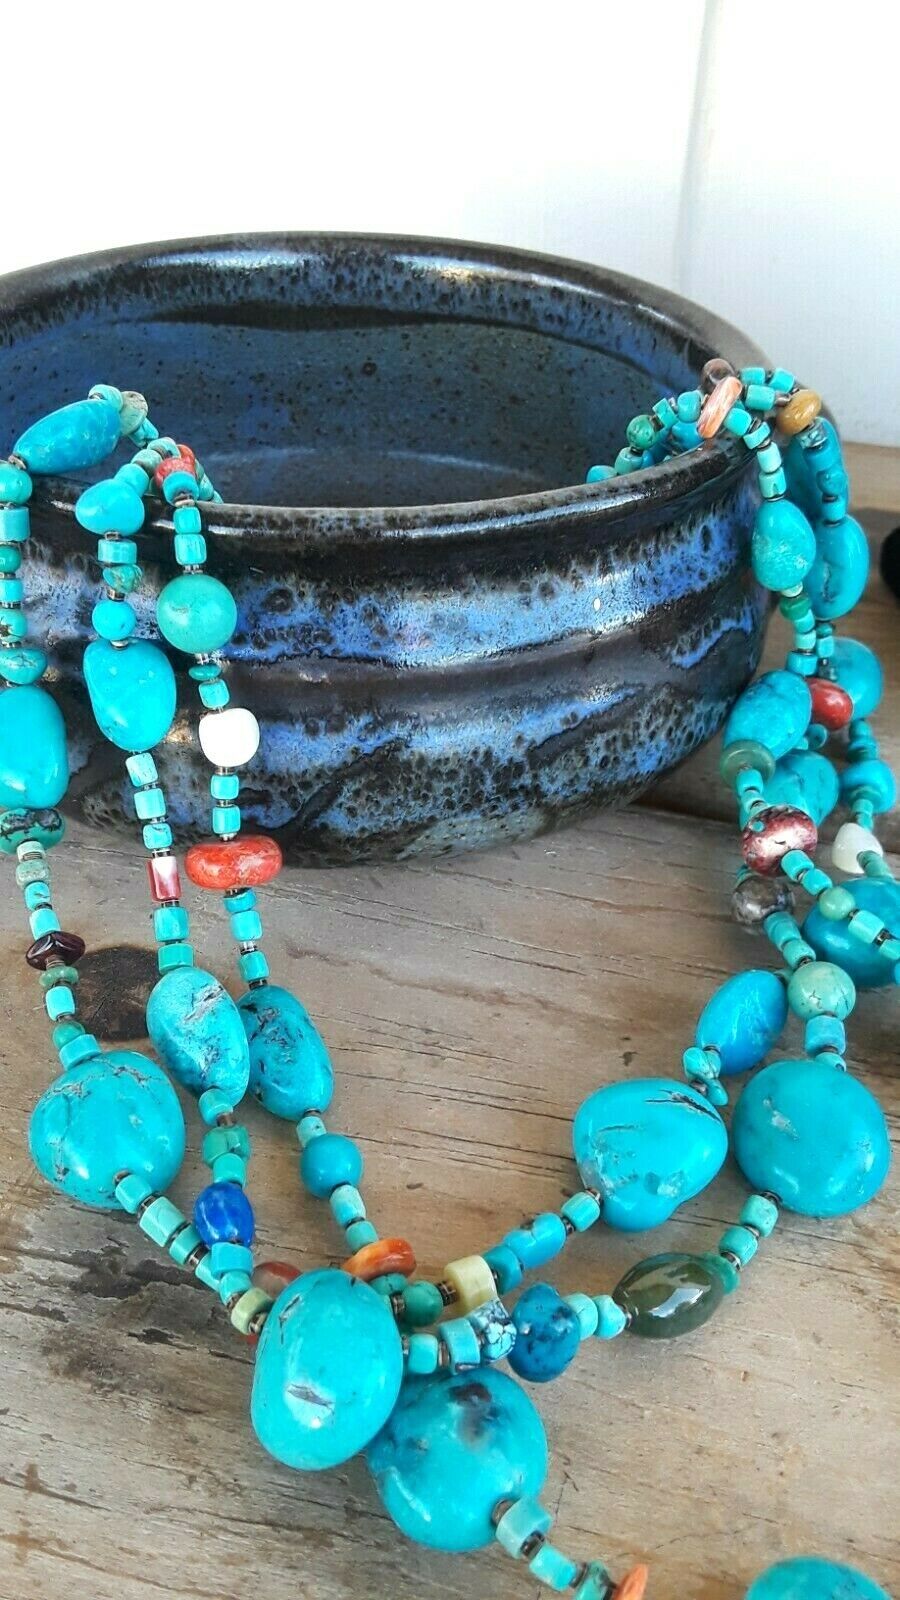 Zuni Turquoise Necklace w/ Heishi, Coral & Multi Beads - NWOT